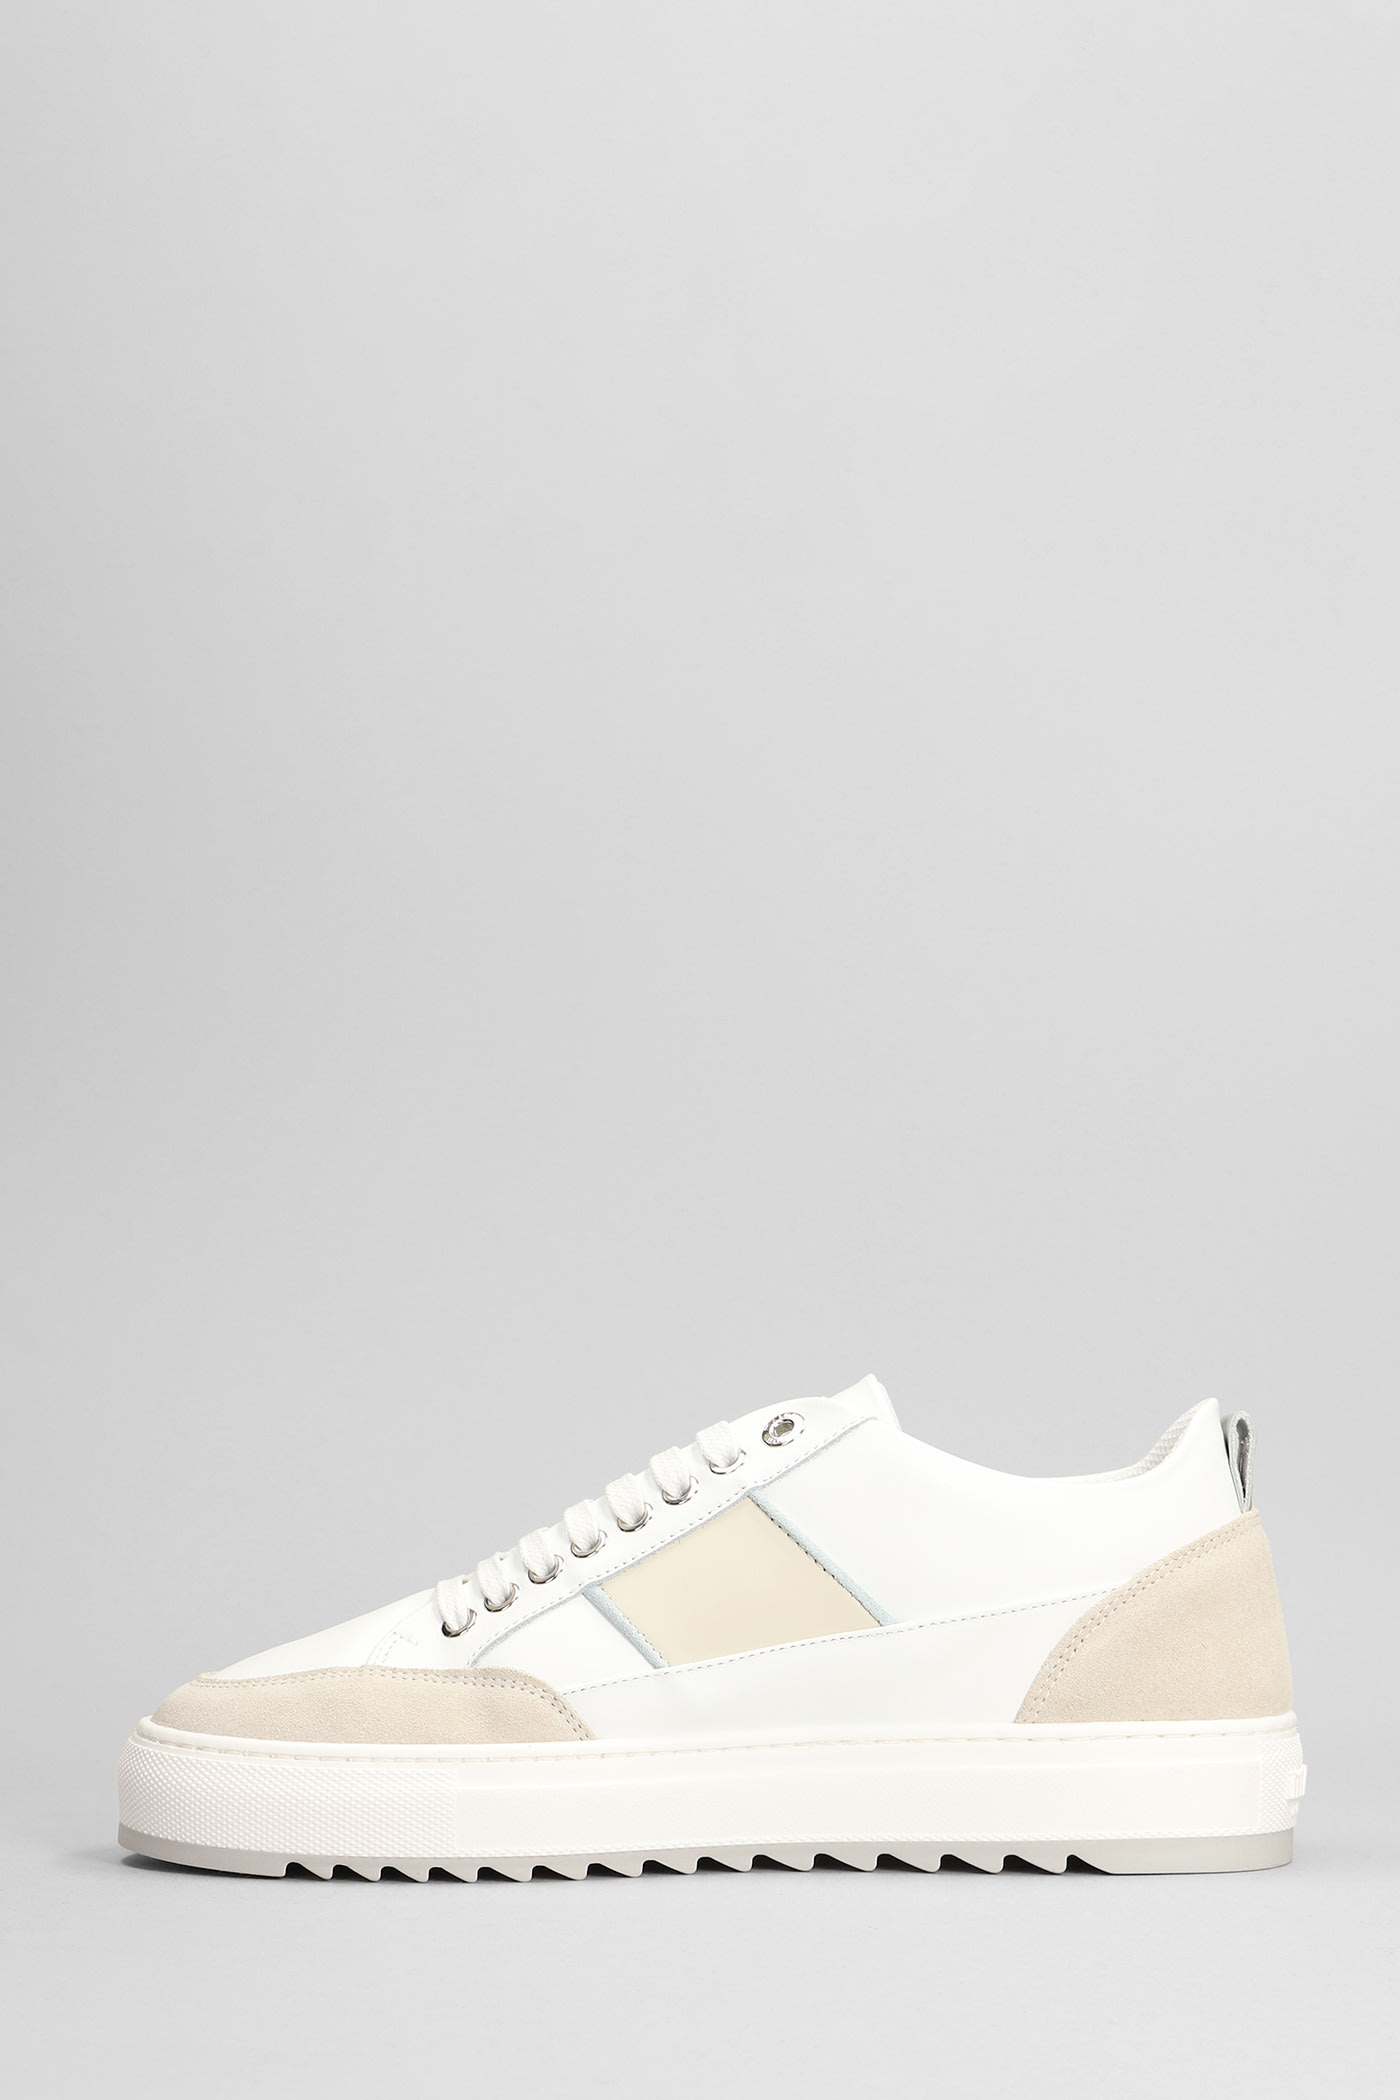 Shop Mason Garments Tia Sneakers In White Suede And Leather